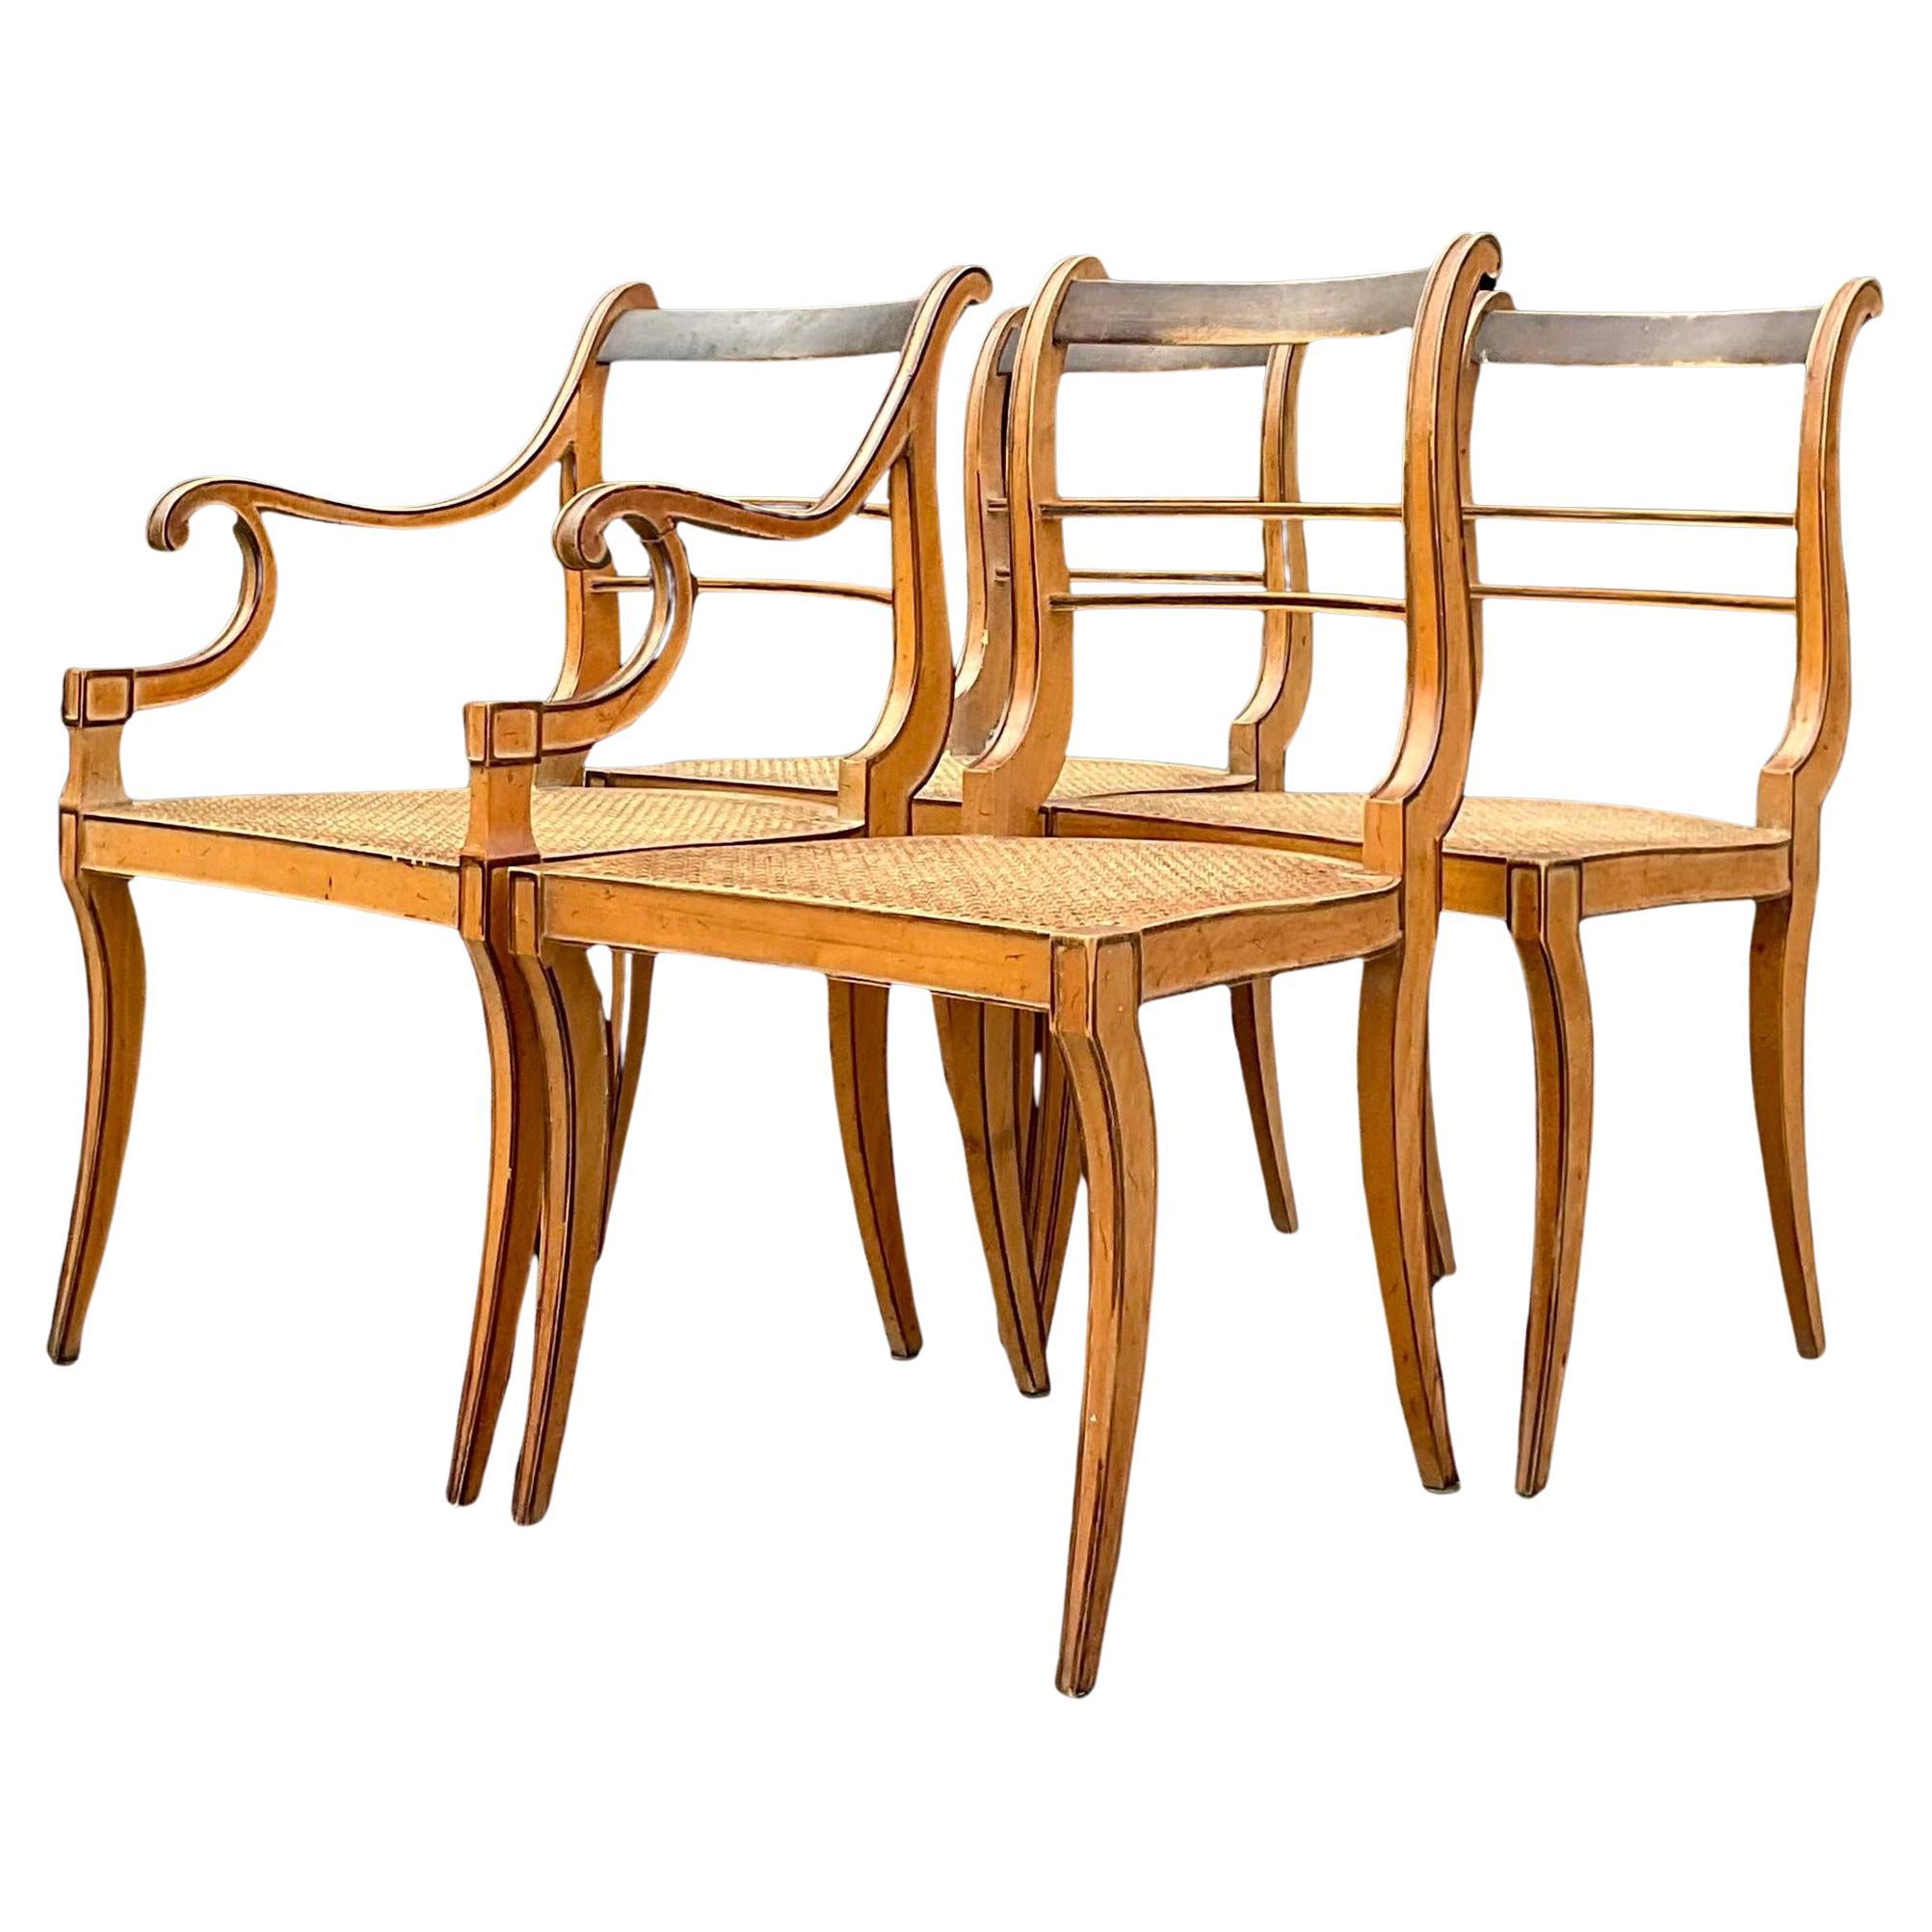 Vintage Boho Scroll Back Cane Dining Chairs - Set of Four For Sale